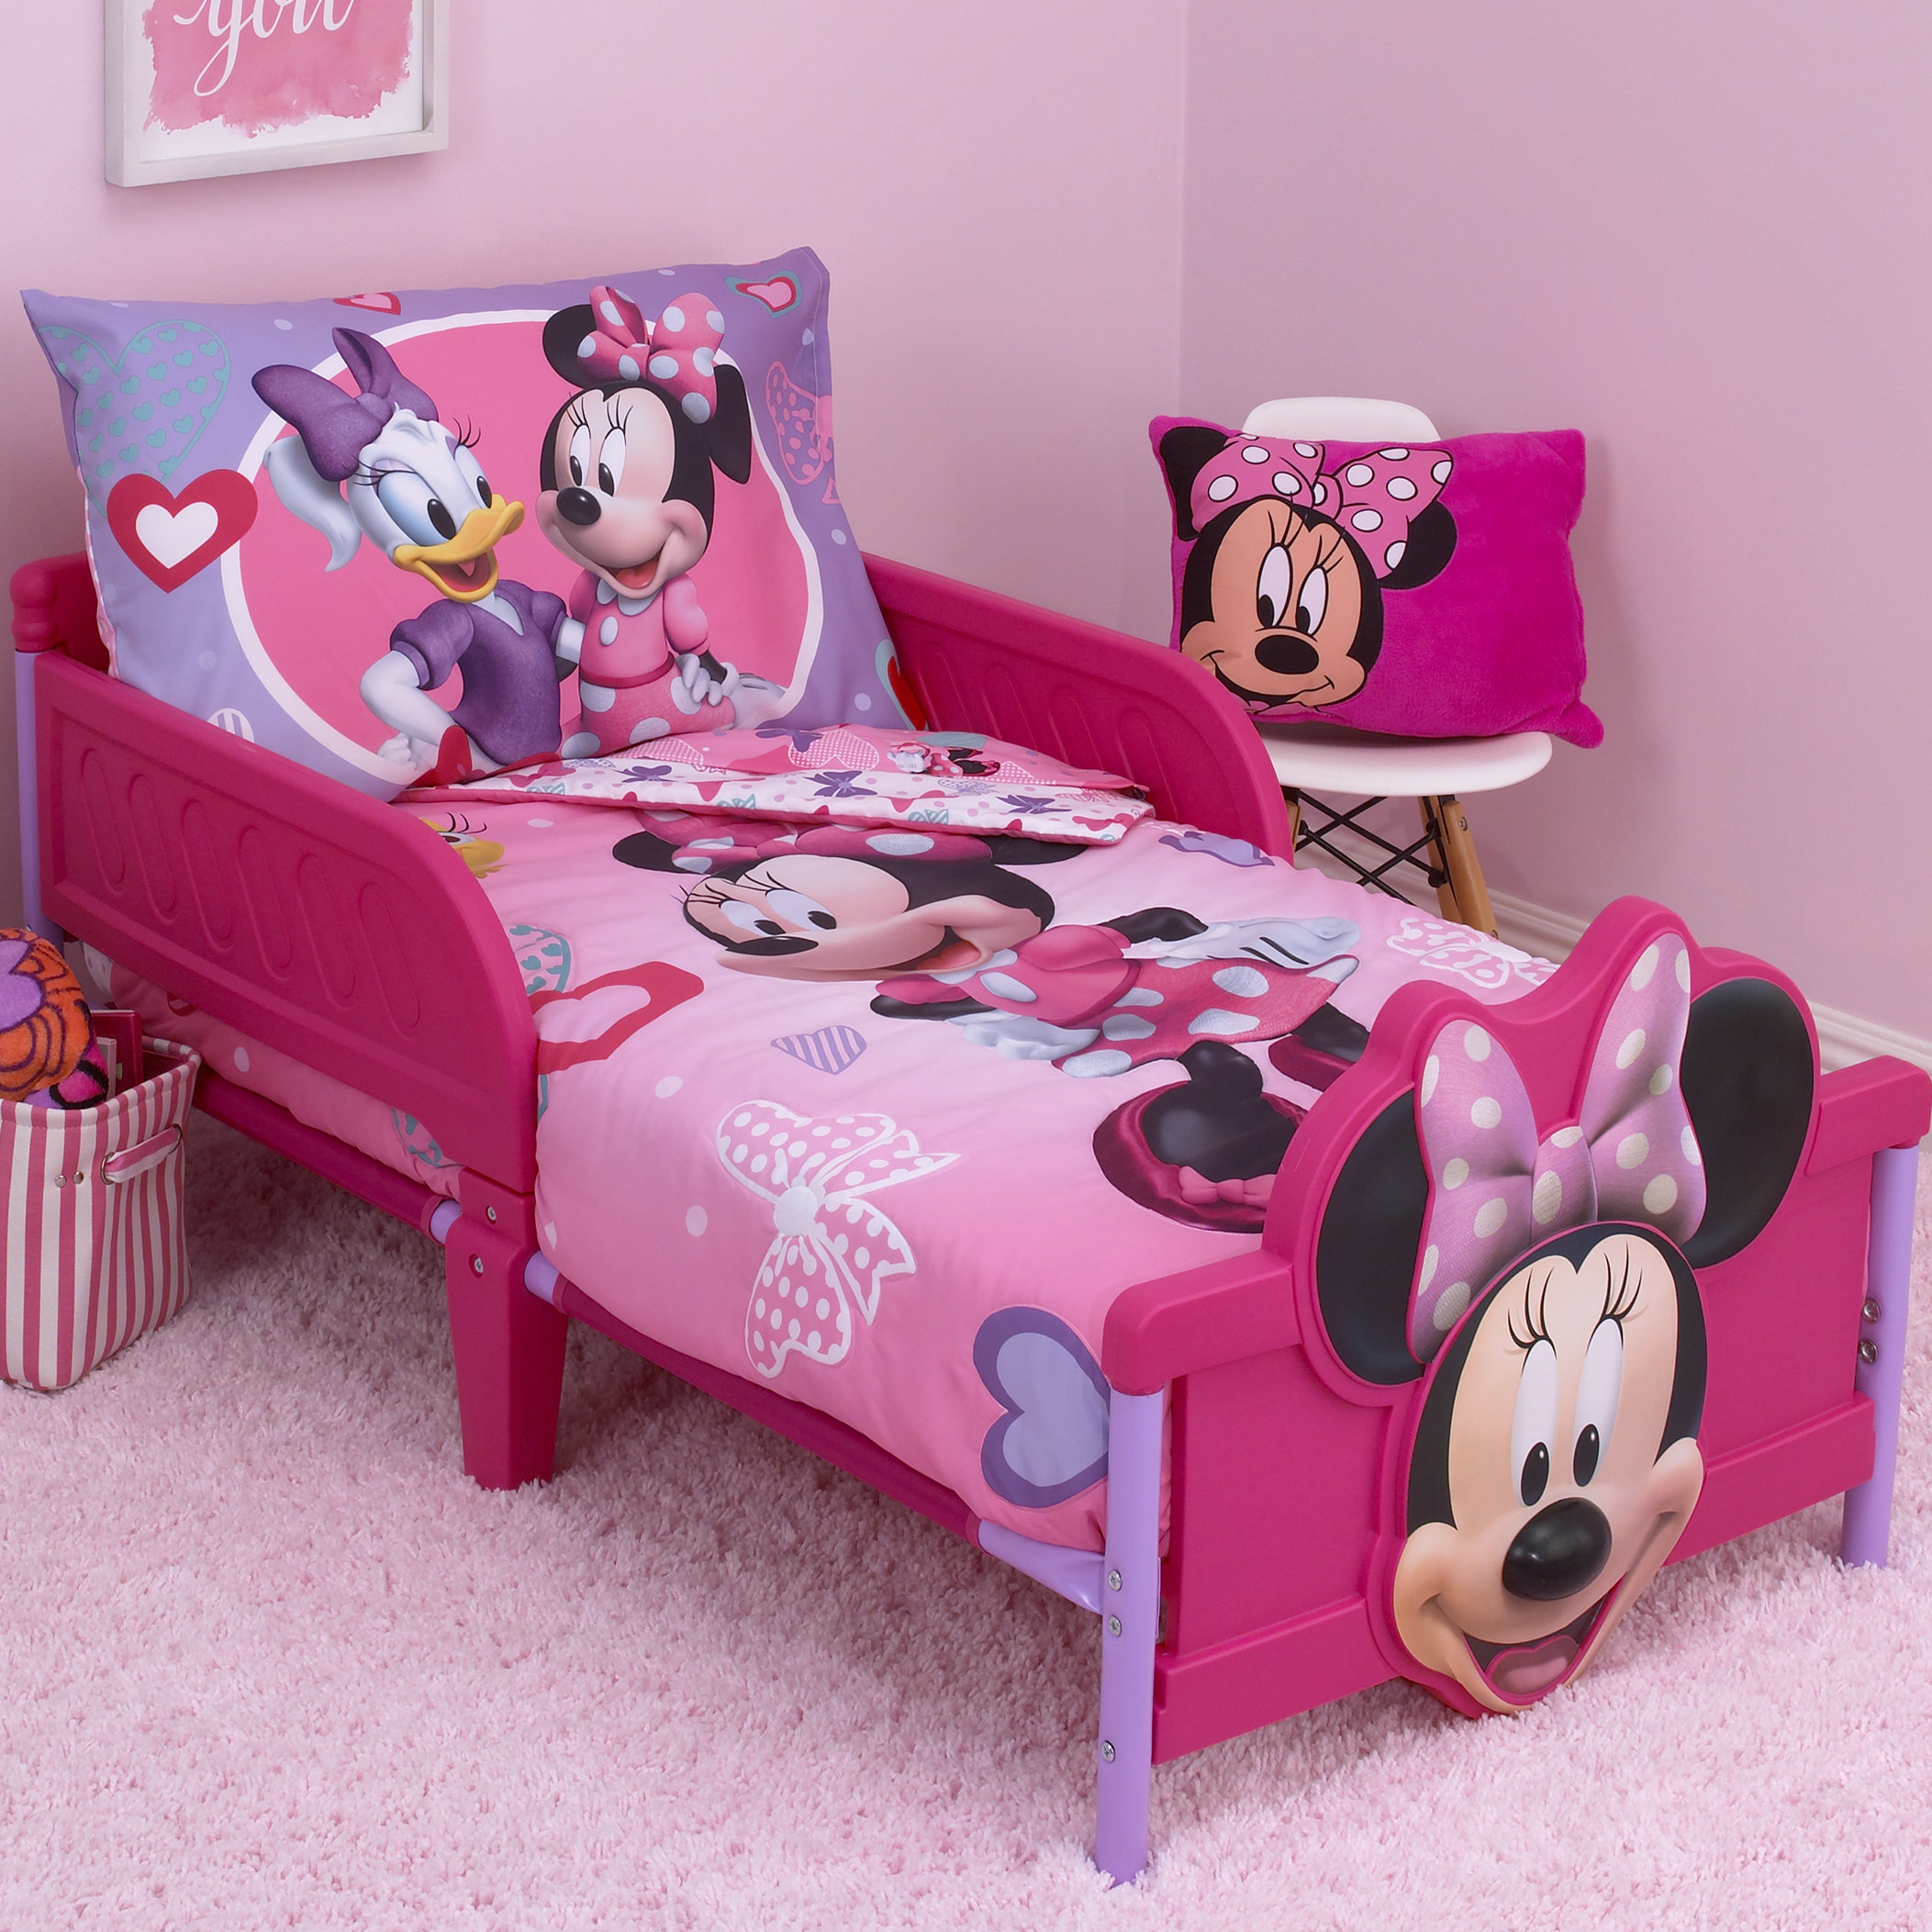 Minnie Mouse Hearts And Bows 4 Piece Toddler Bedding Set regarding dimensions 2105 X 2105